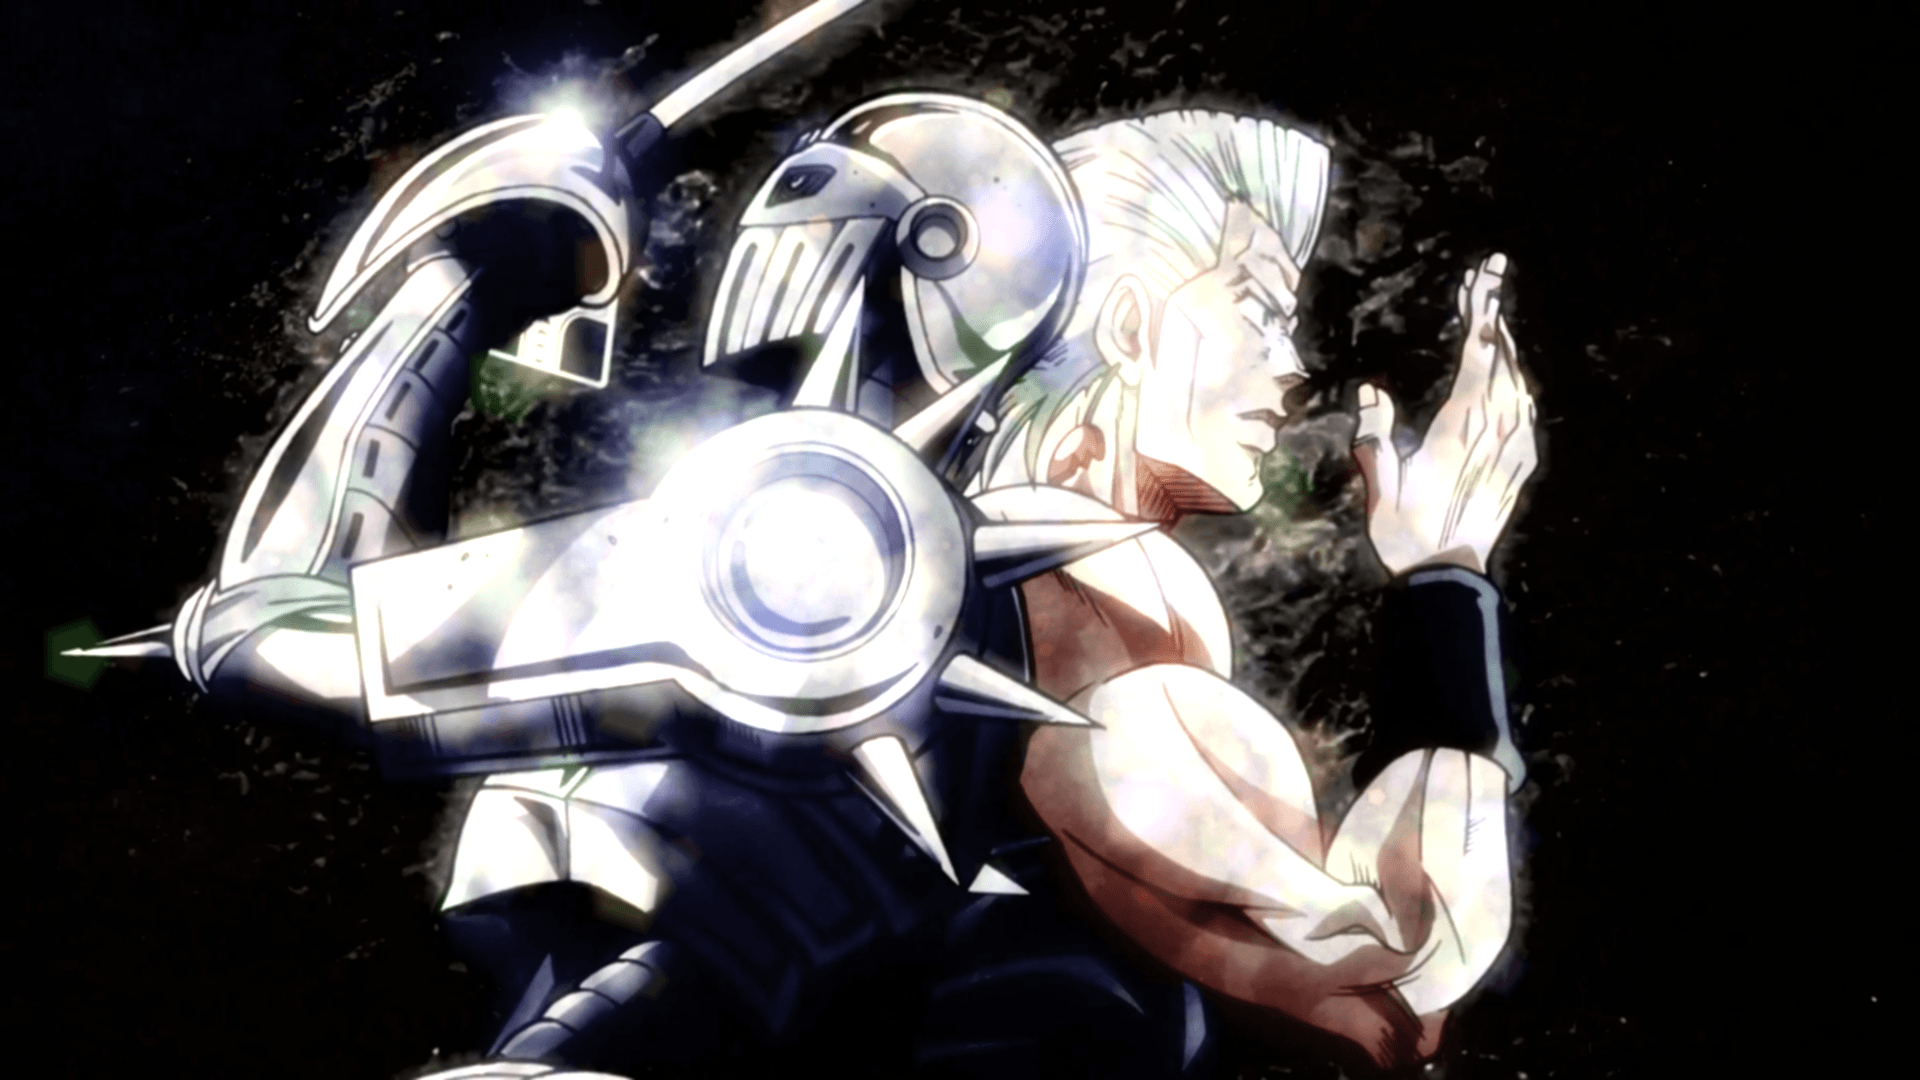 A Knight's Requiem: Betrayed Male Polnareff Reader X DxD - You